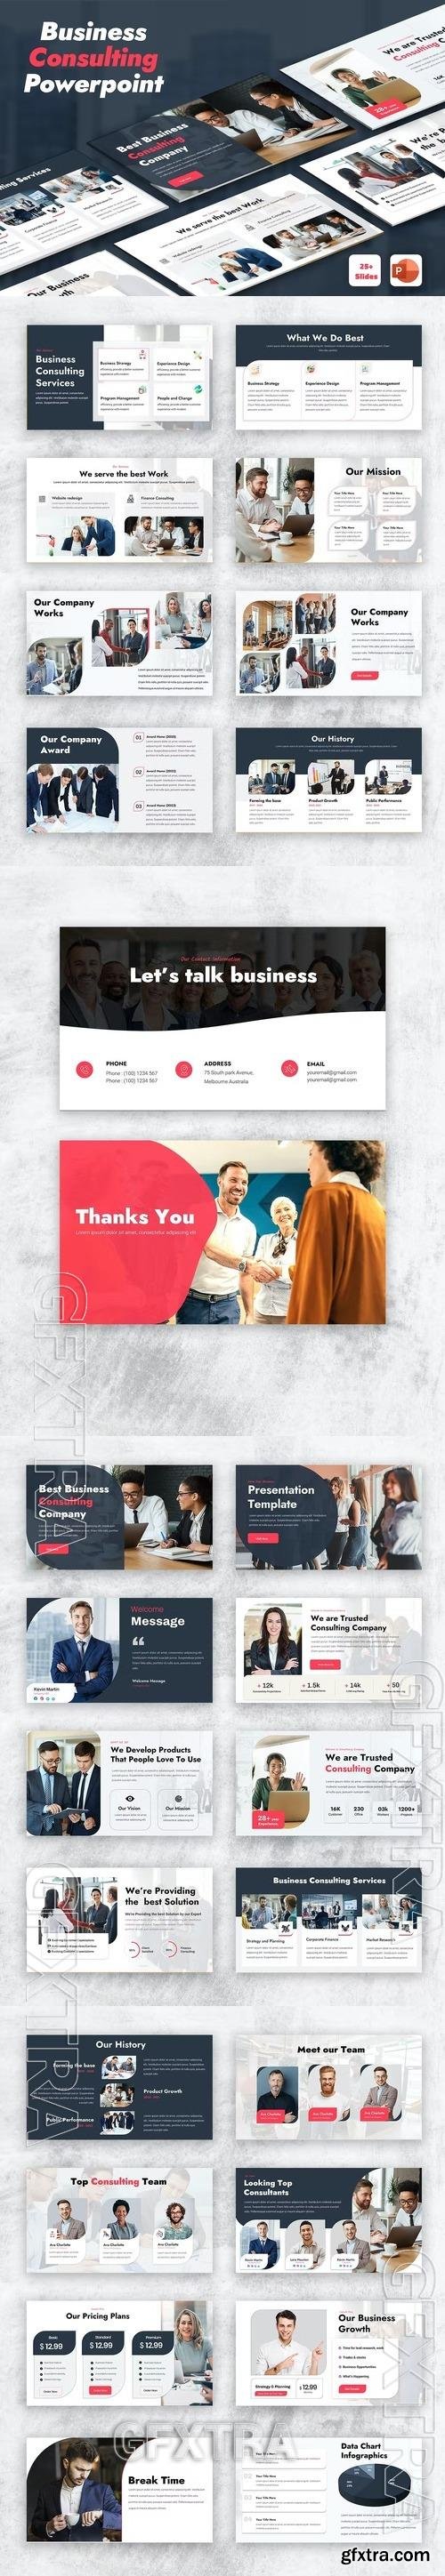 Business Consulting PowerPoint Template V64K97A